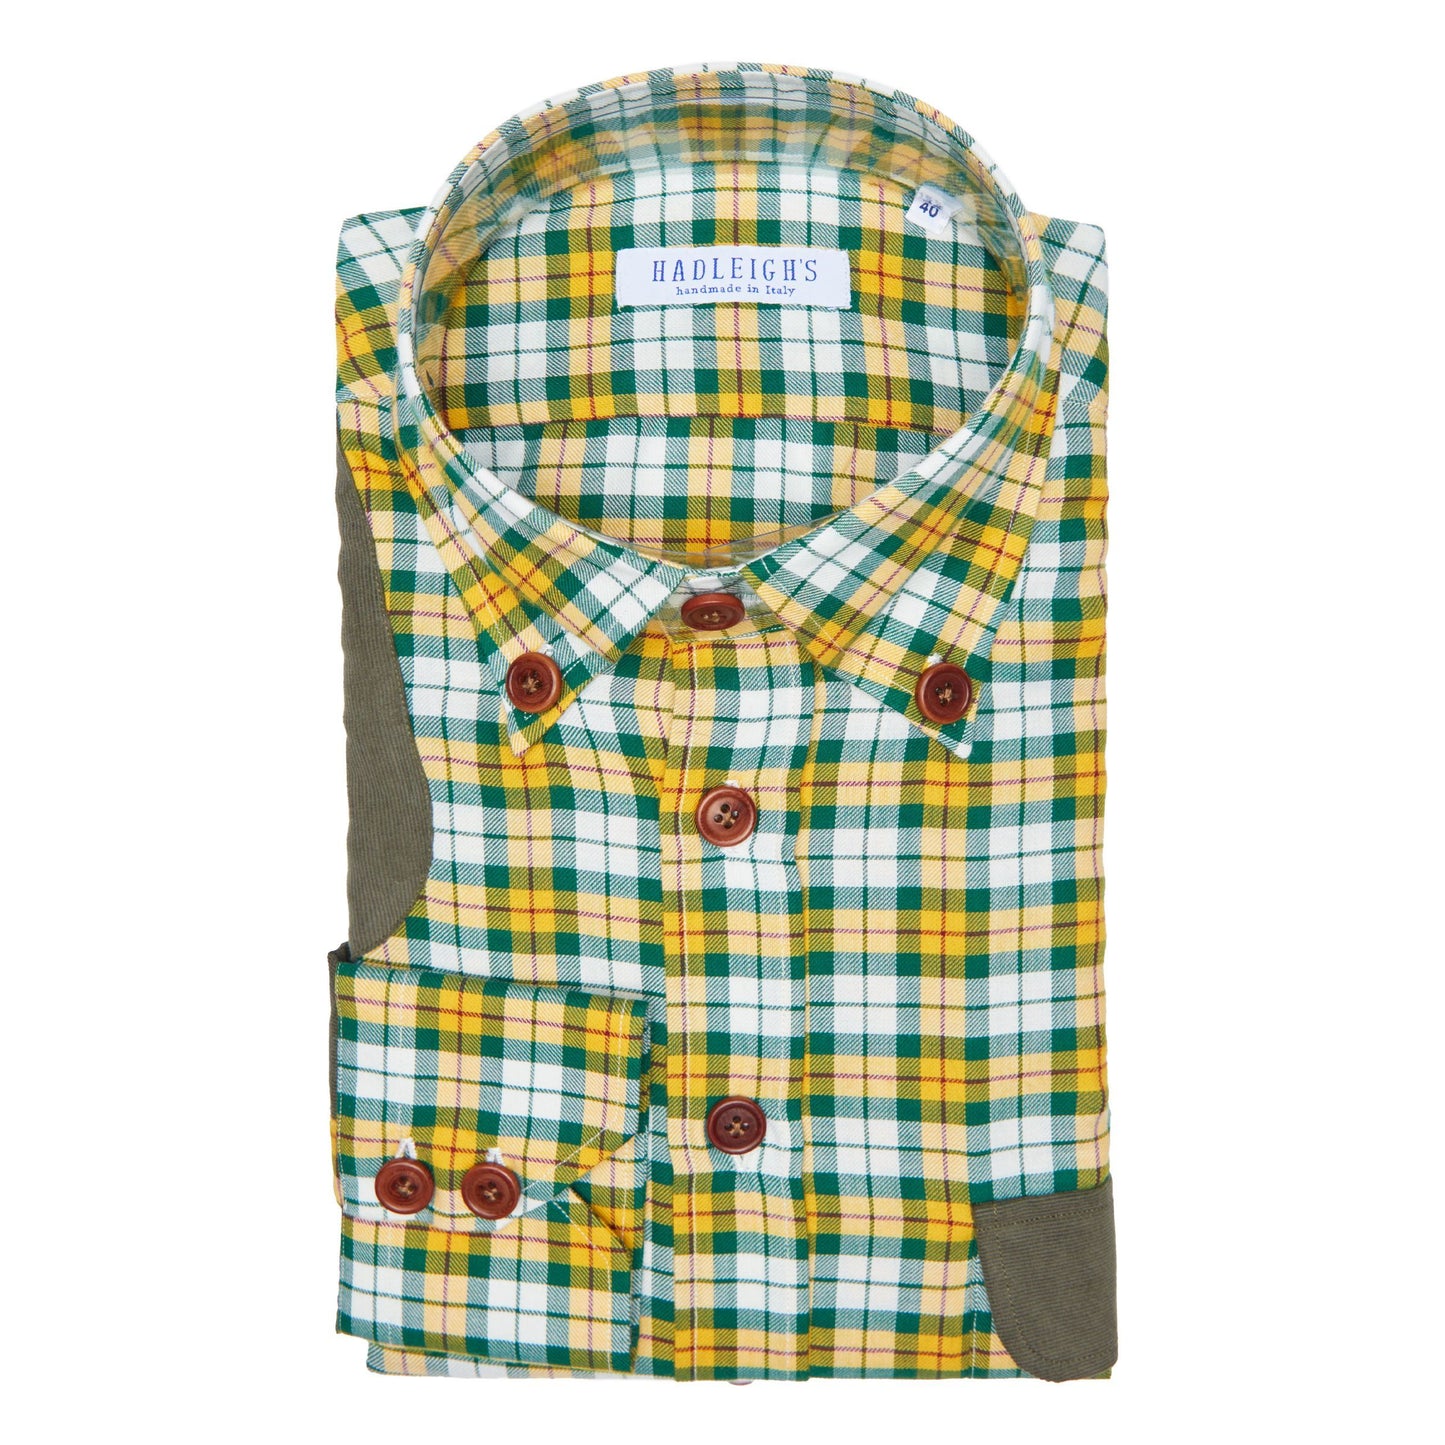 Rip Field Shirt in Yellow/Green Over Check